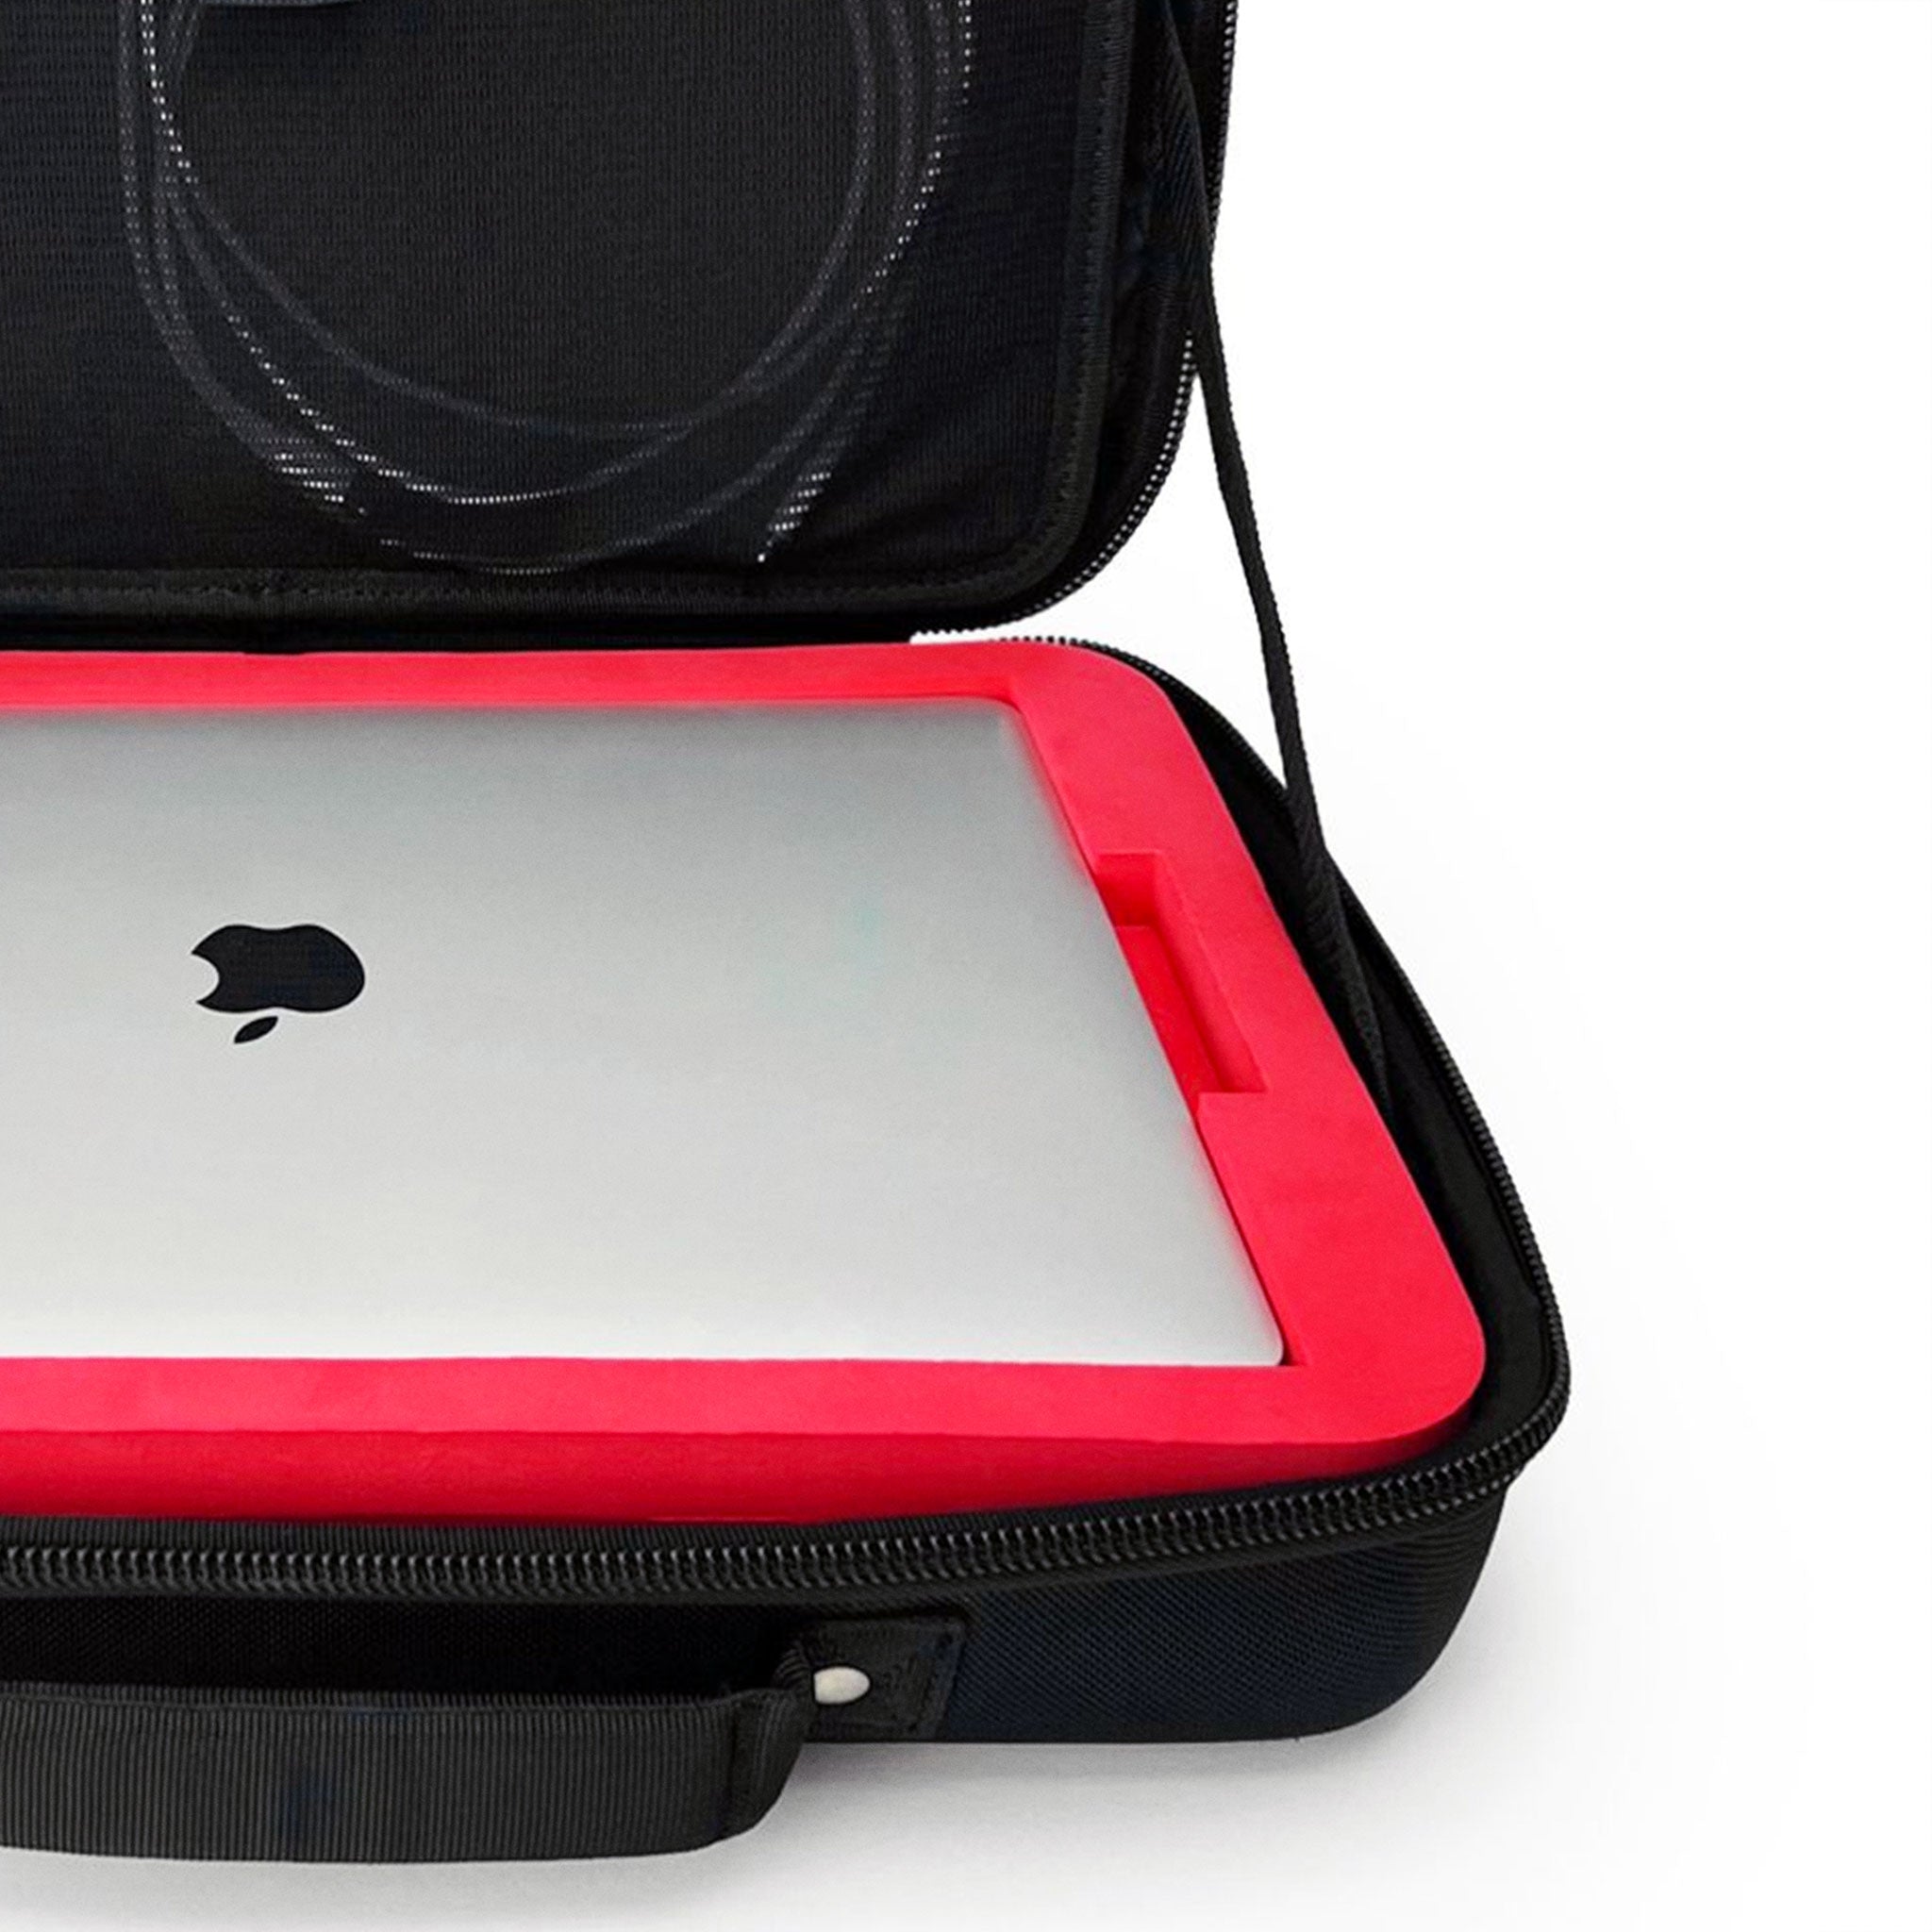 PULSE Case For 13" MacBook Pro or Air